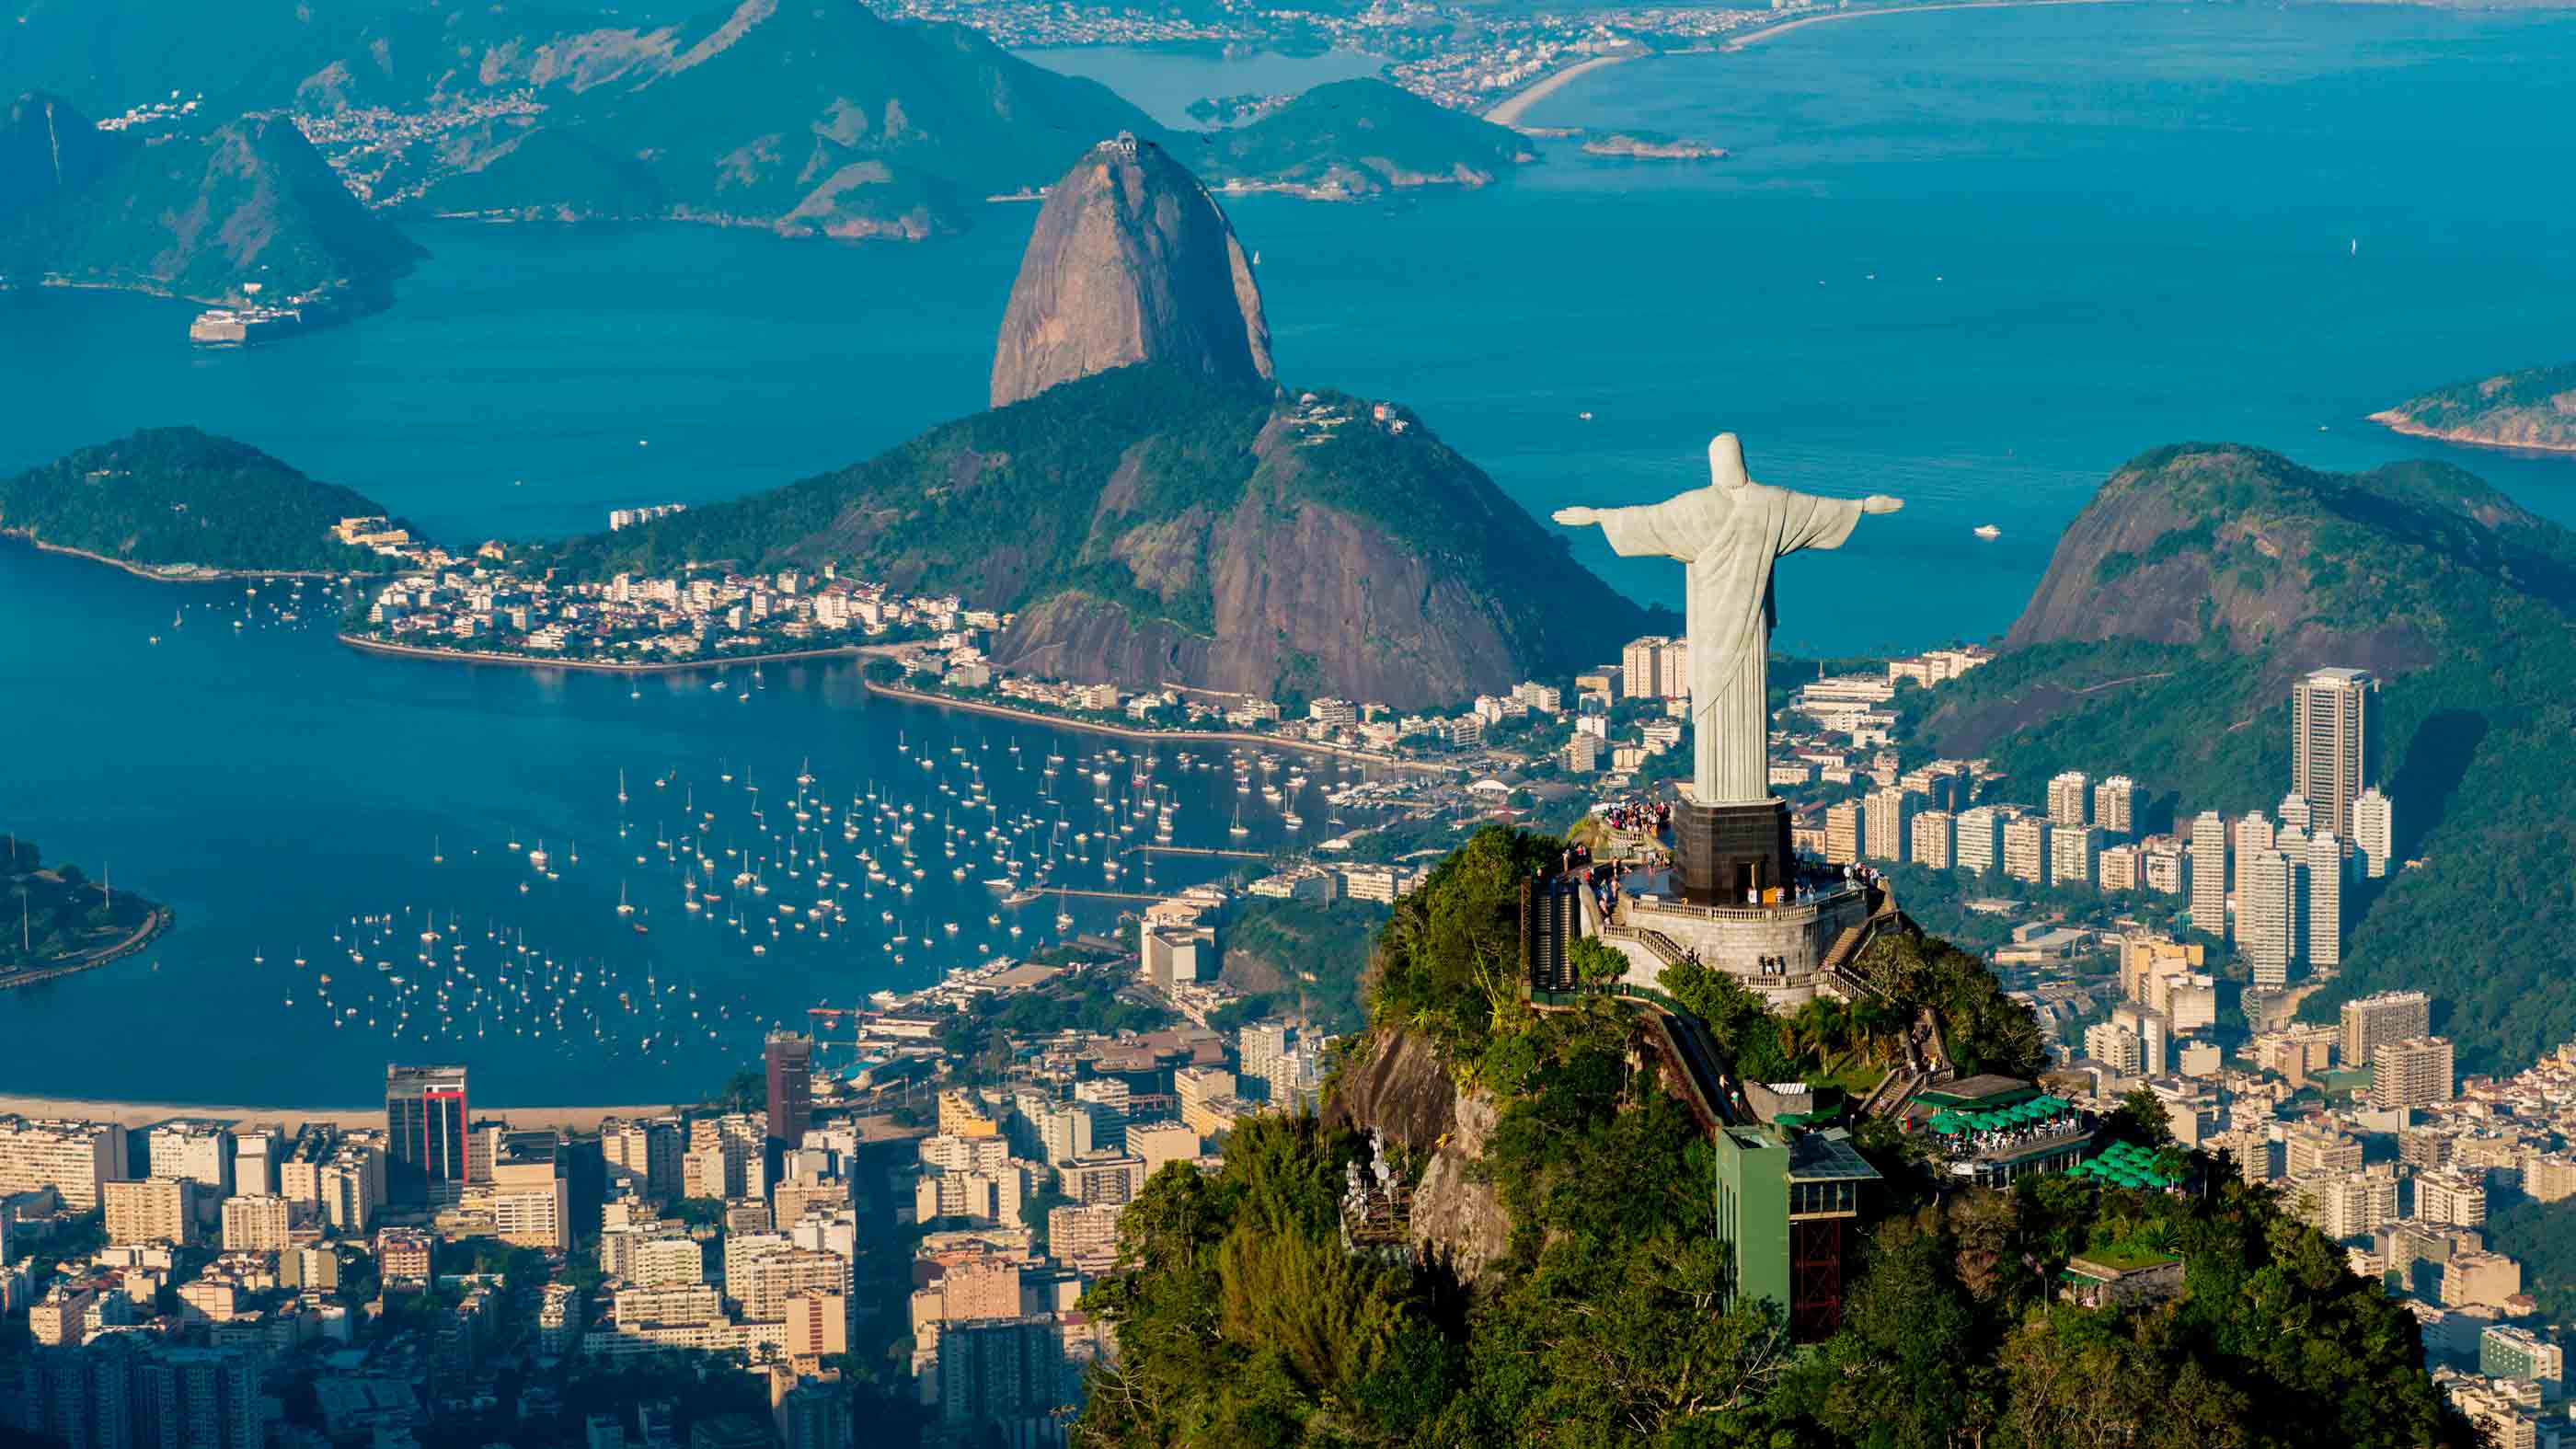 If You Can Name 16/20 of These Cities by One Photo, I’ll Be Really Impressed Rio de Janeiro, Brazil